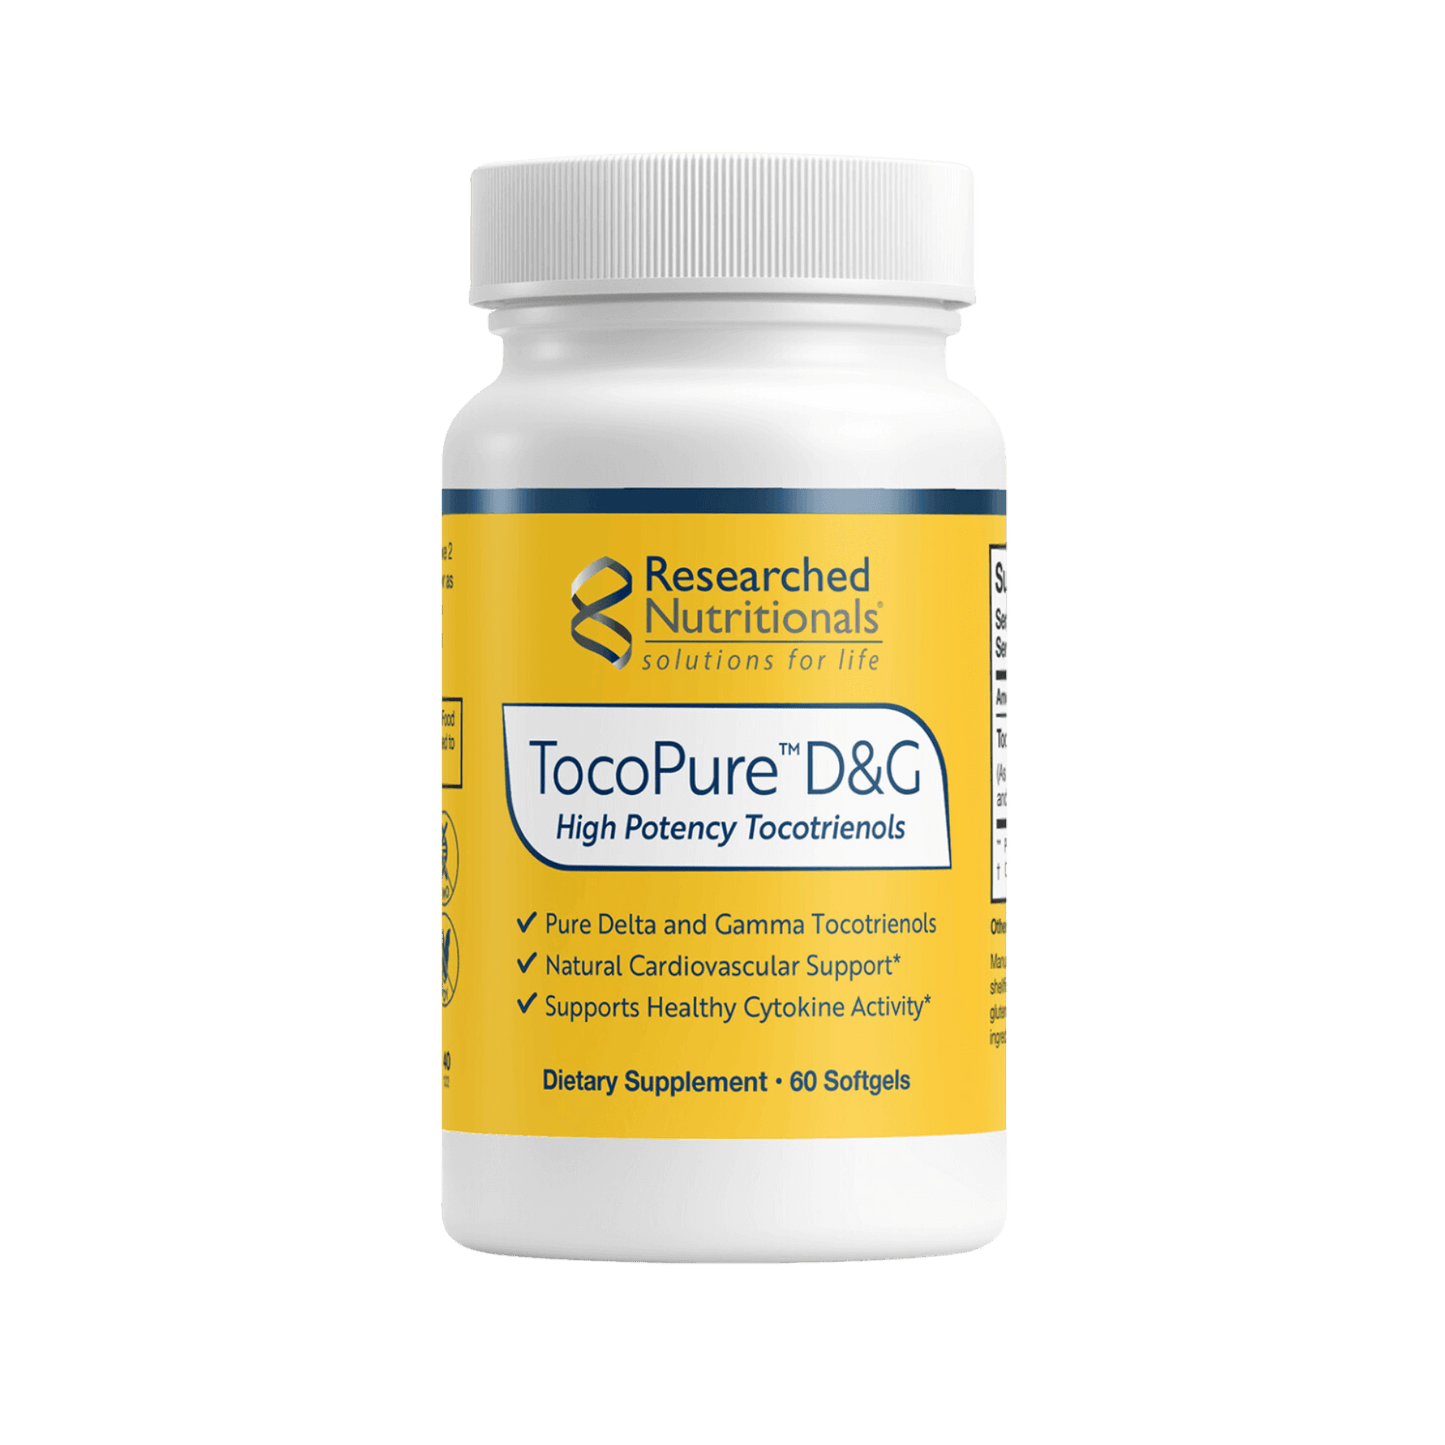 Researched Nutritionals TocoPure D&G softgels